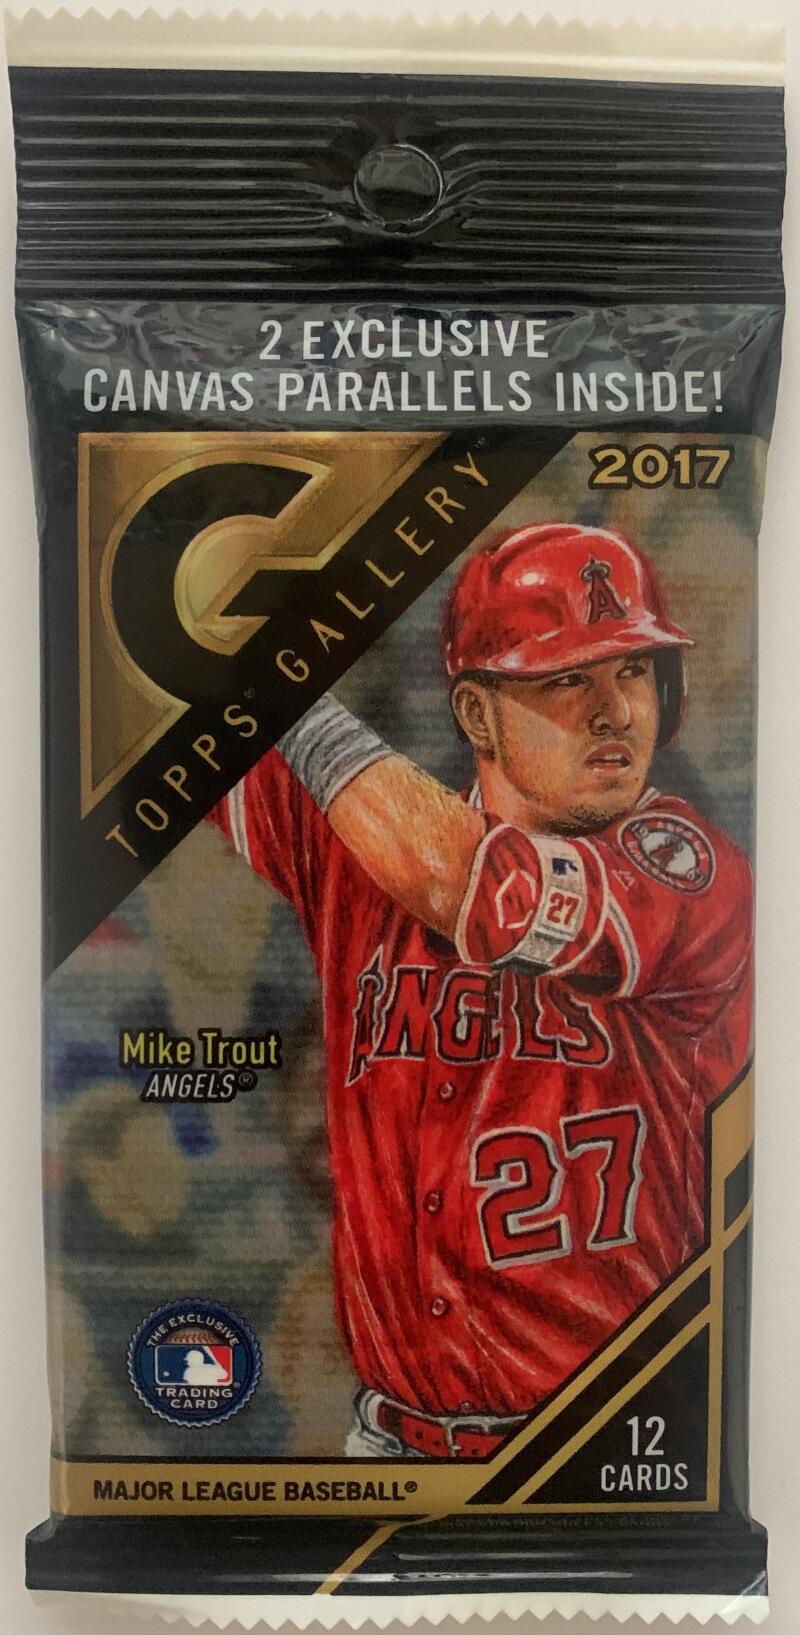 2017 Topps Gallery Baseball Factory Sealed 12 Card Pack - 2 Exclusive Canvas